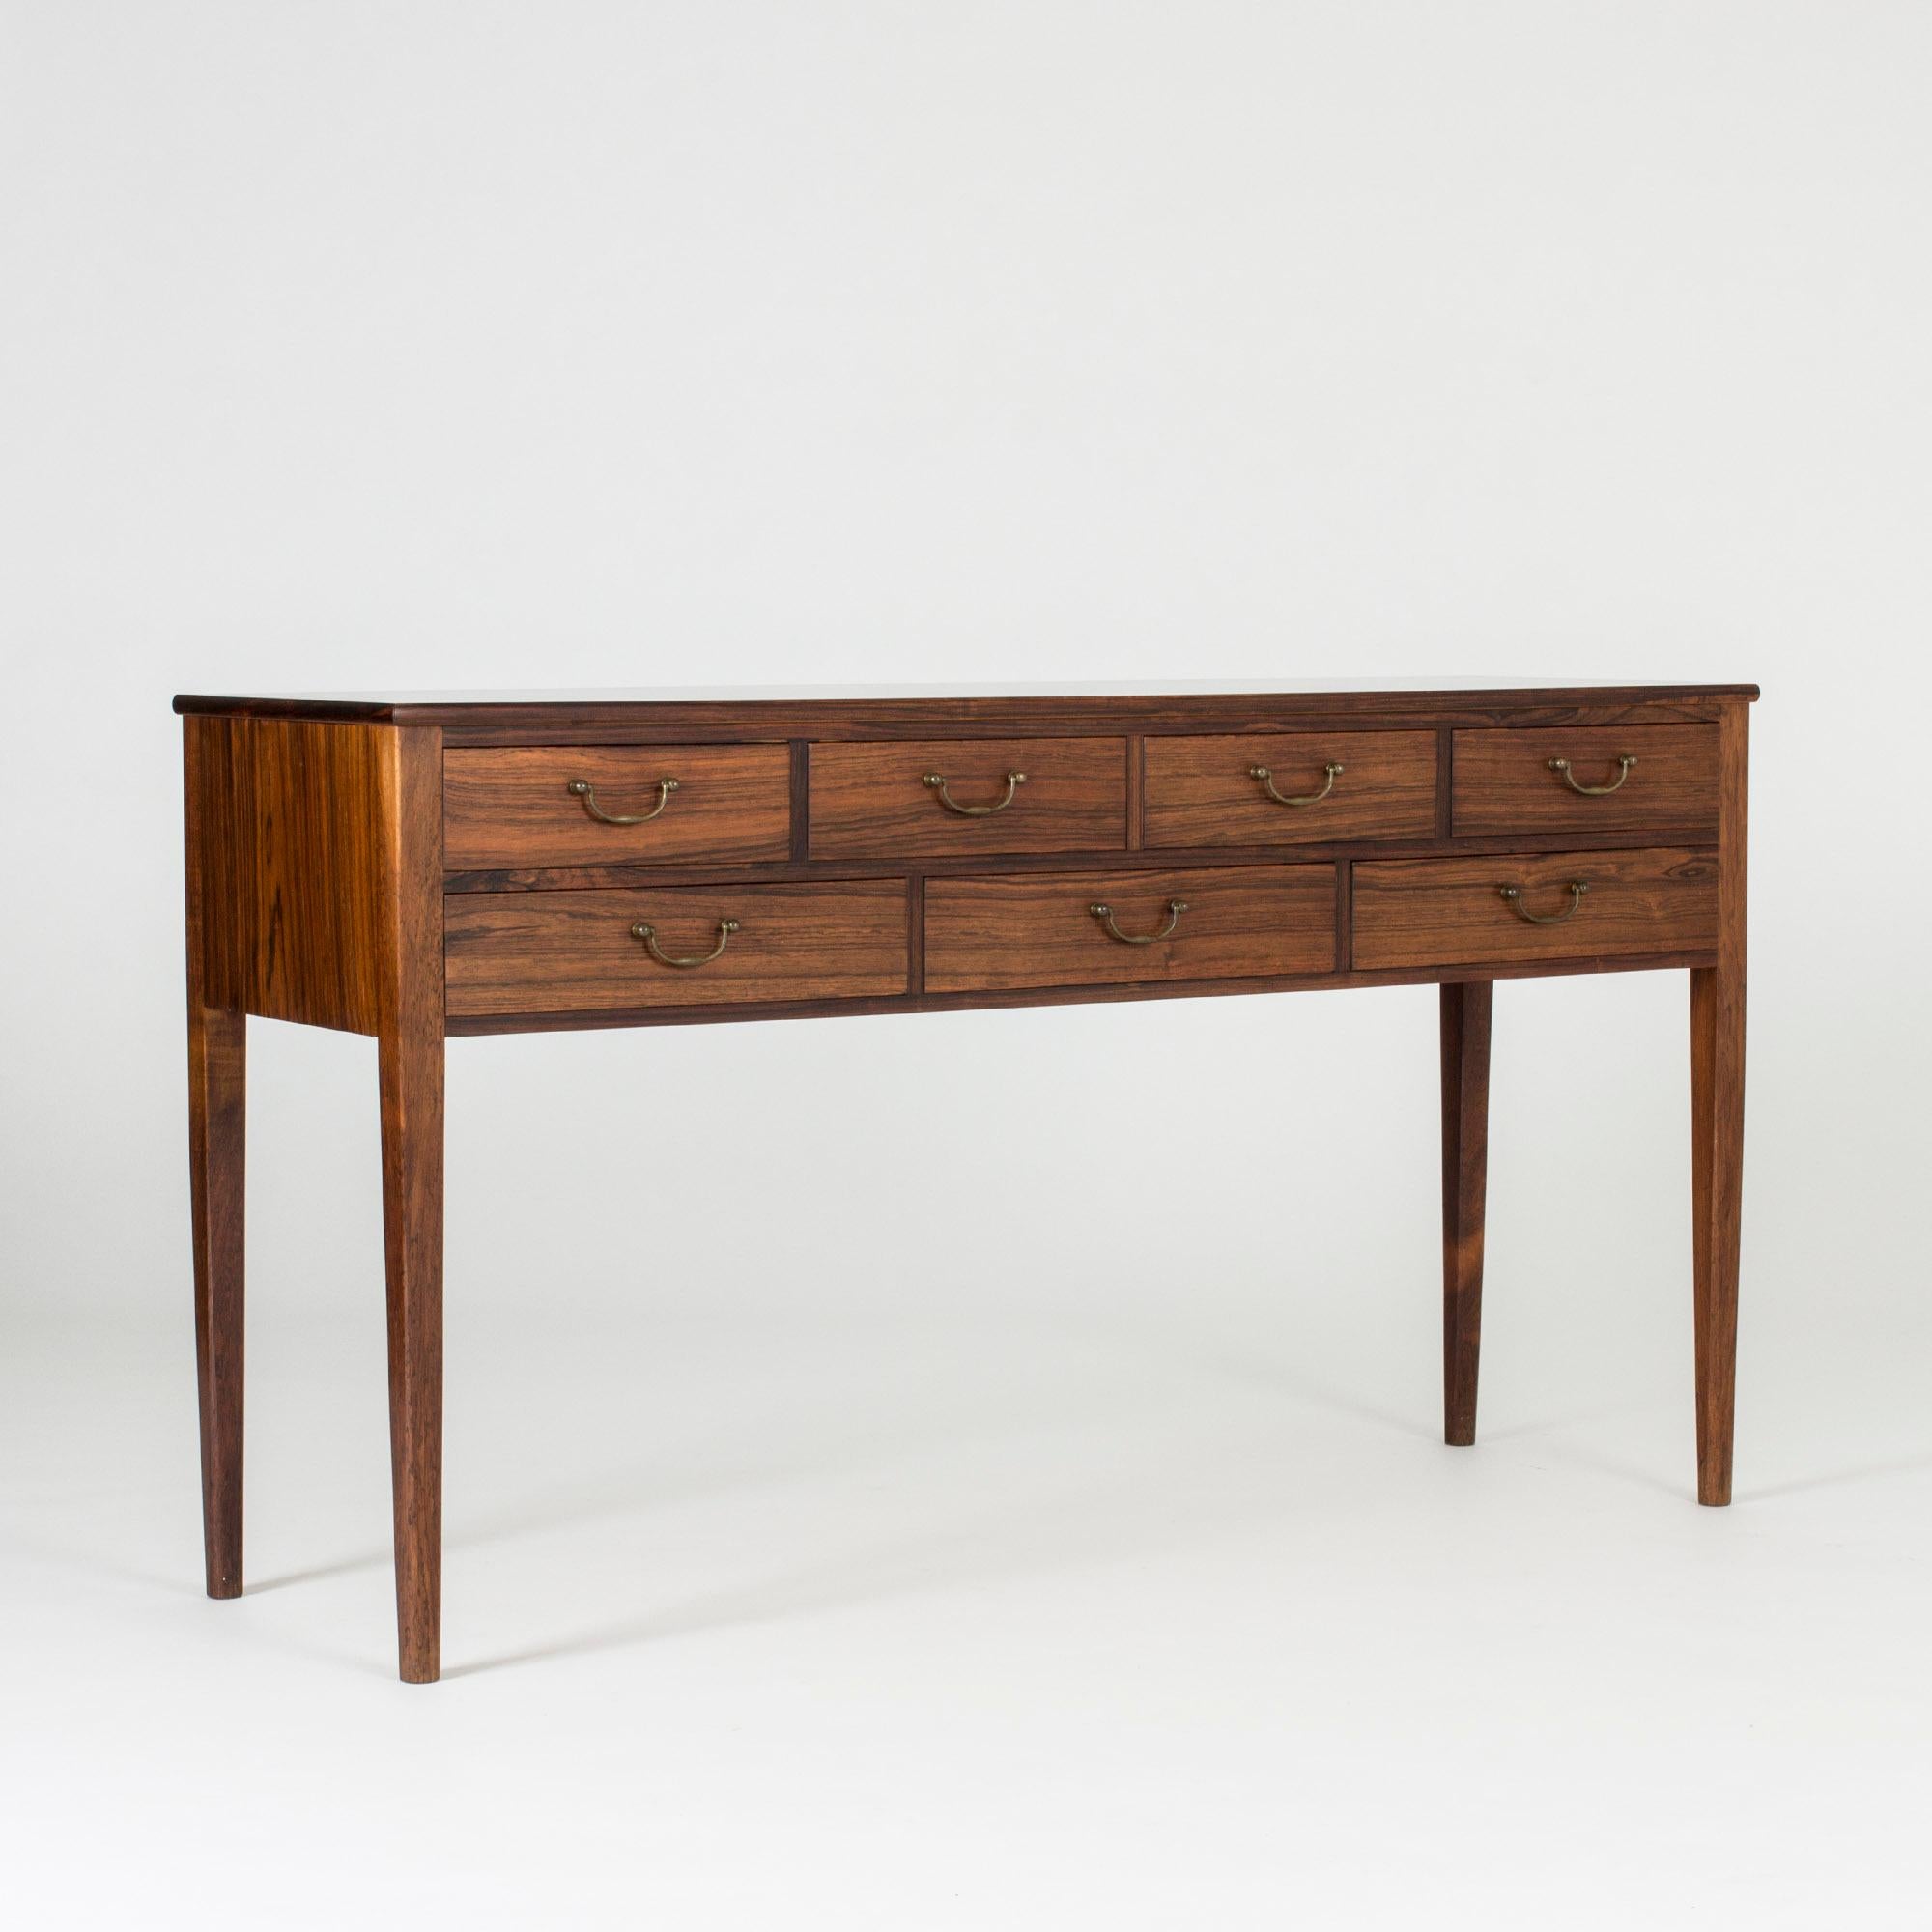 Small rosewood sideboard by Ole Wanscher in a light, neat design. Rich, dark wood, great proportions and beautiful execution.